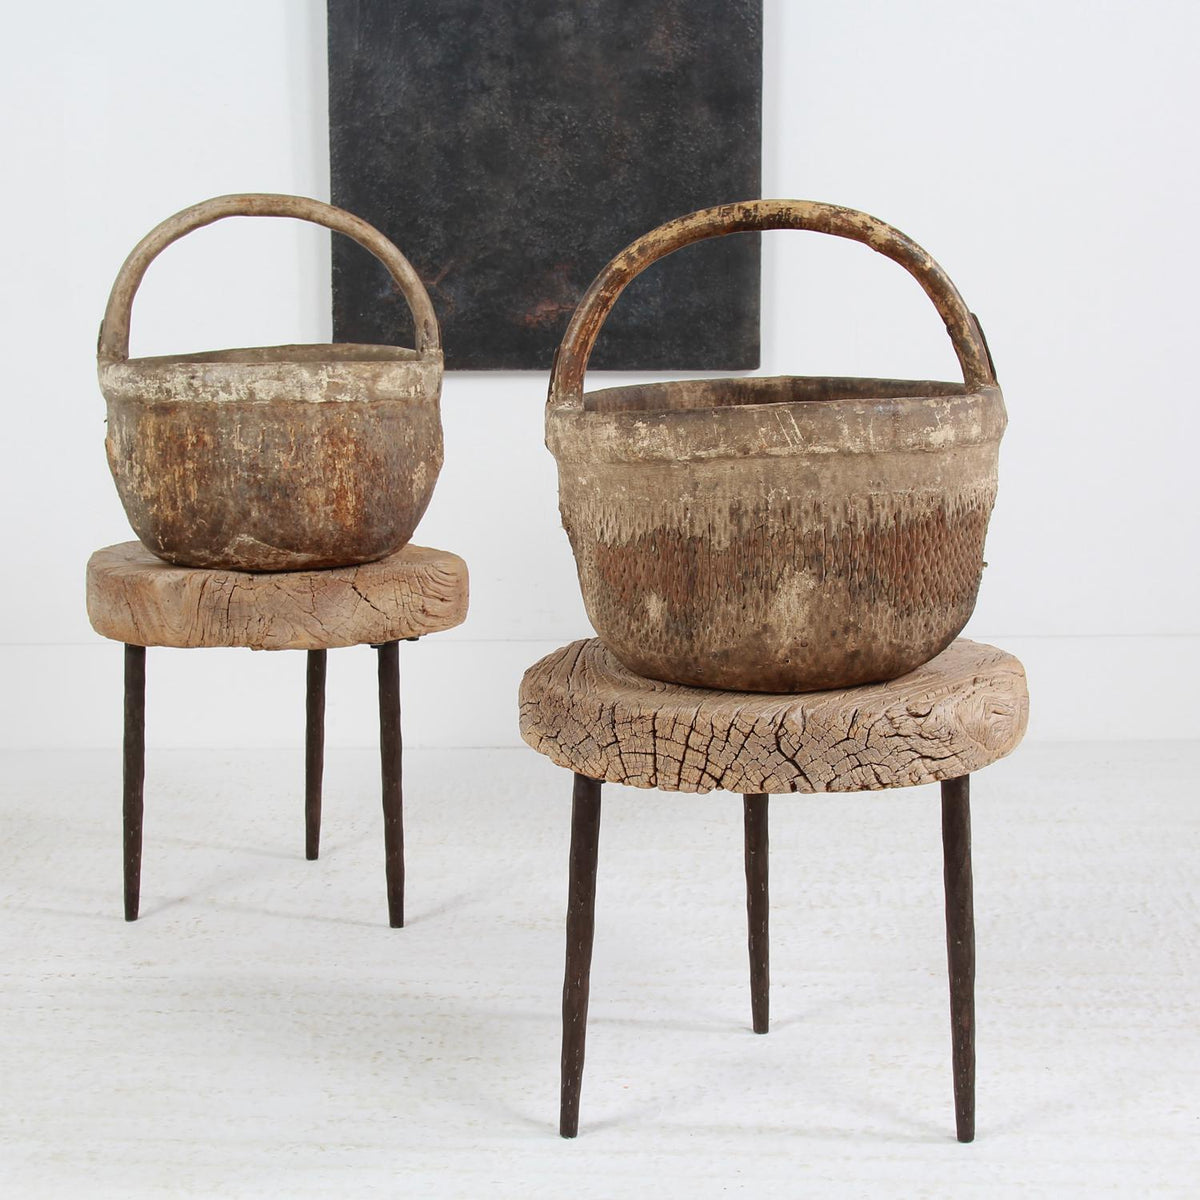 WONDERFUL RUSTIC ANTIQUE WOVEN RICE BASKETS WITH TREE BRANCH HANDLES